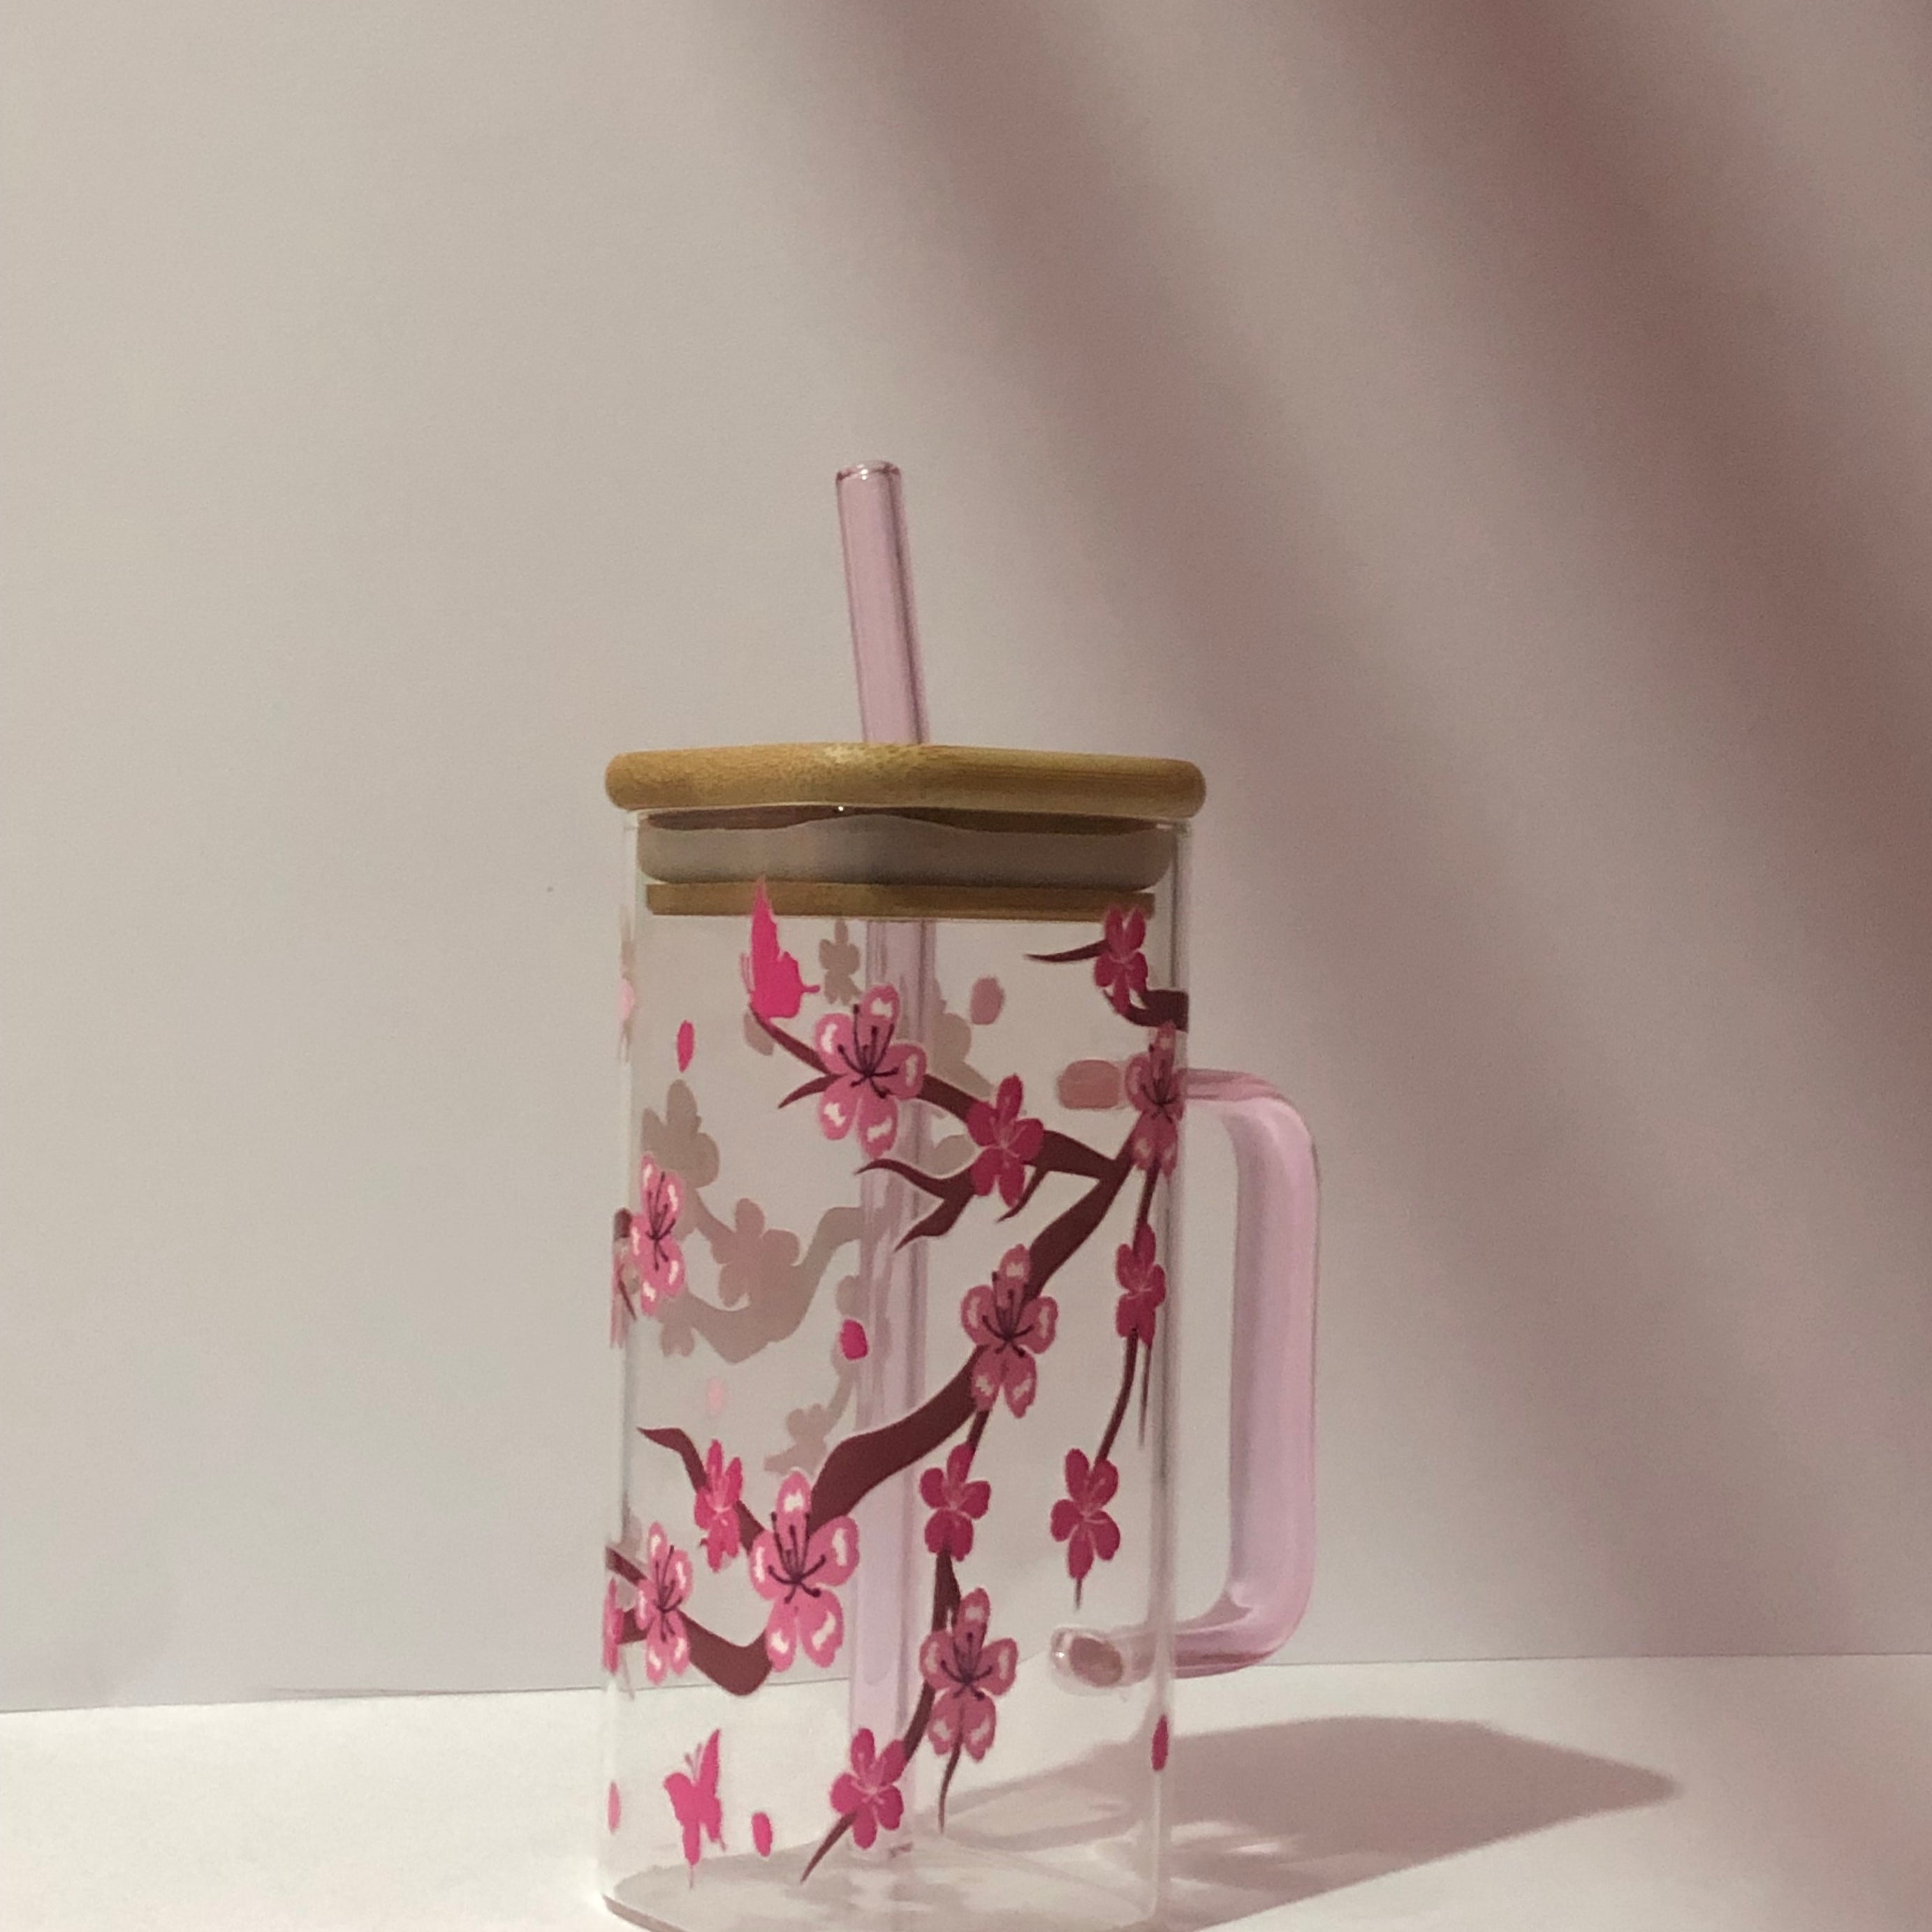 Redbud Tree 16oz Glass Cup: Bamboo Lid and glass straw included - Pink Straw/Grip